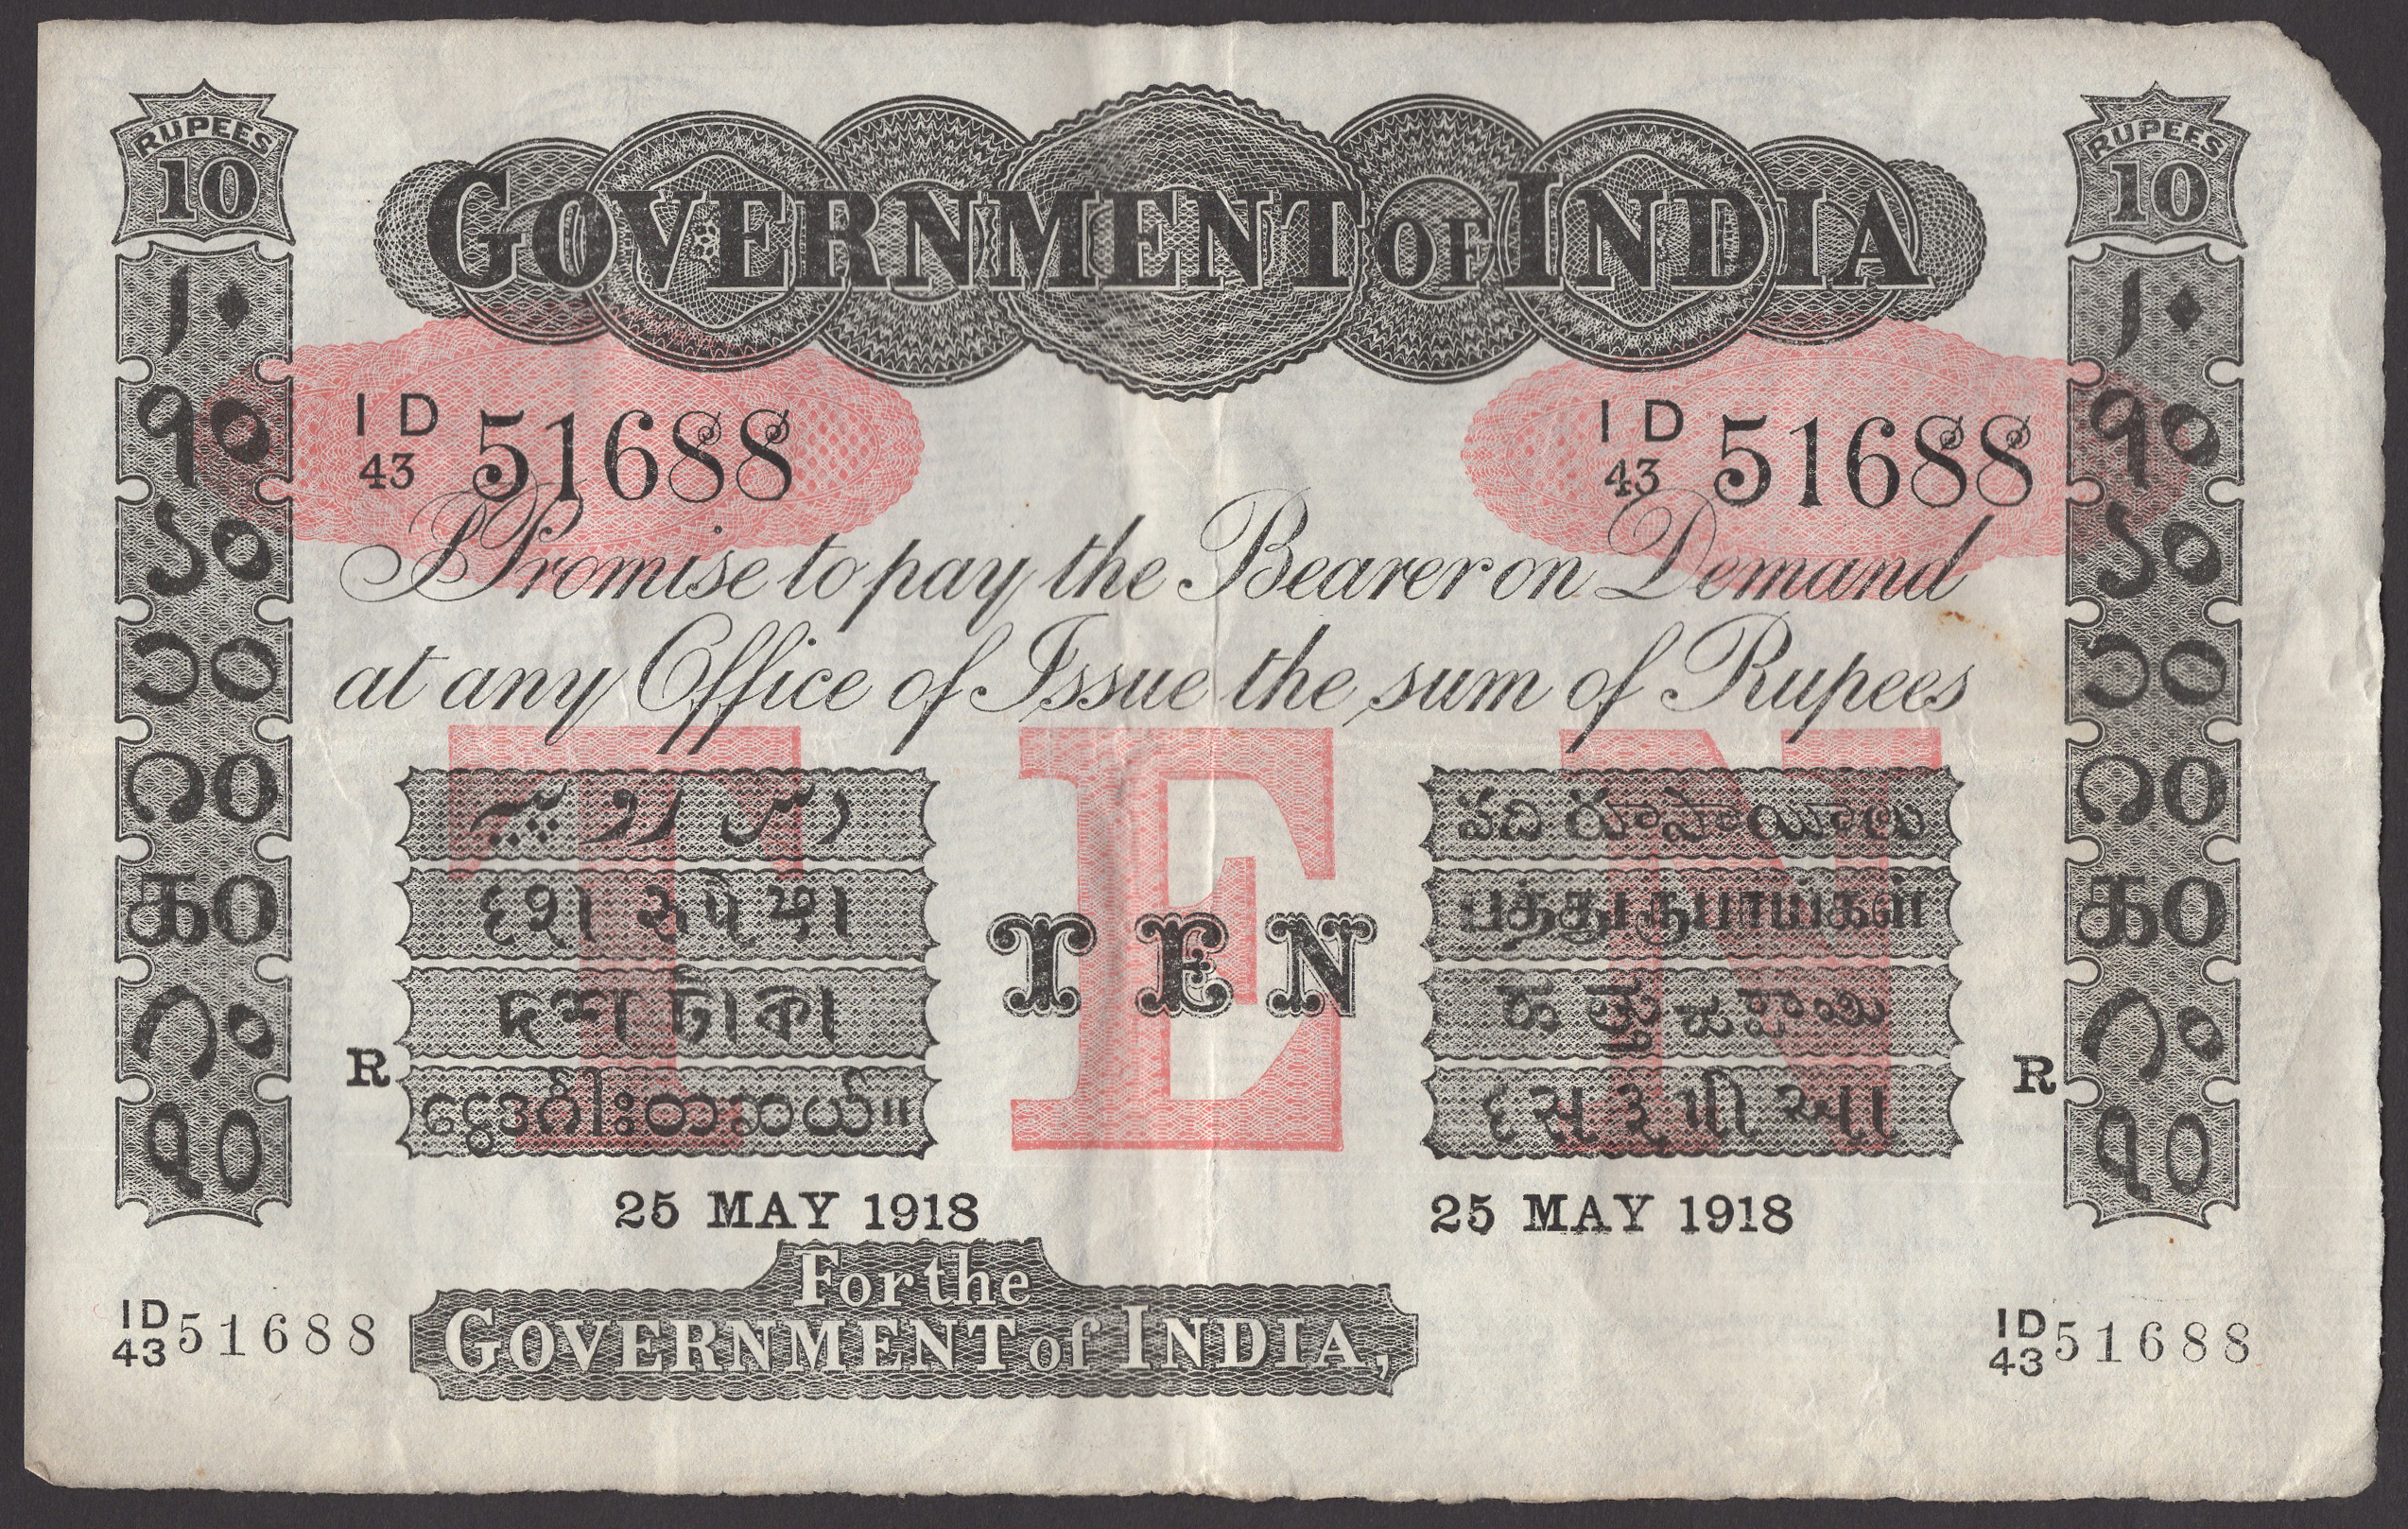 Government of India, 10 Rupees, Rangoon, 25 May 1918, serial number ID/43 51688, unsigned,...